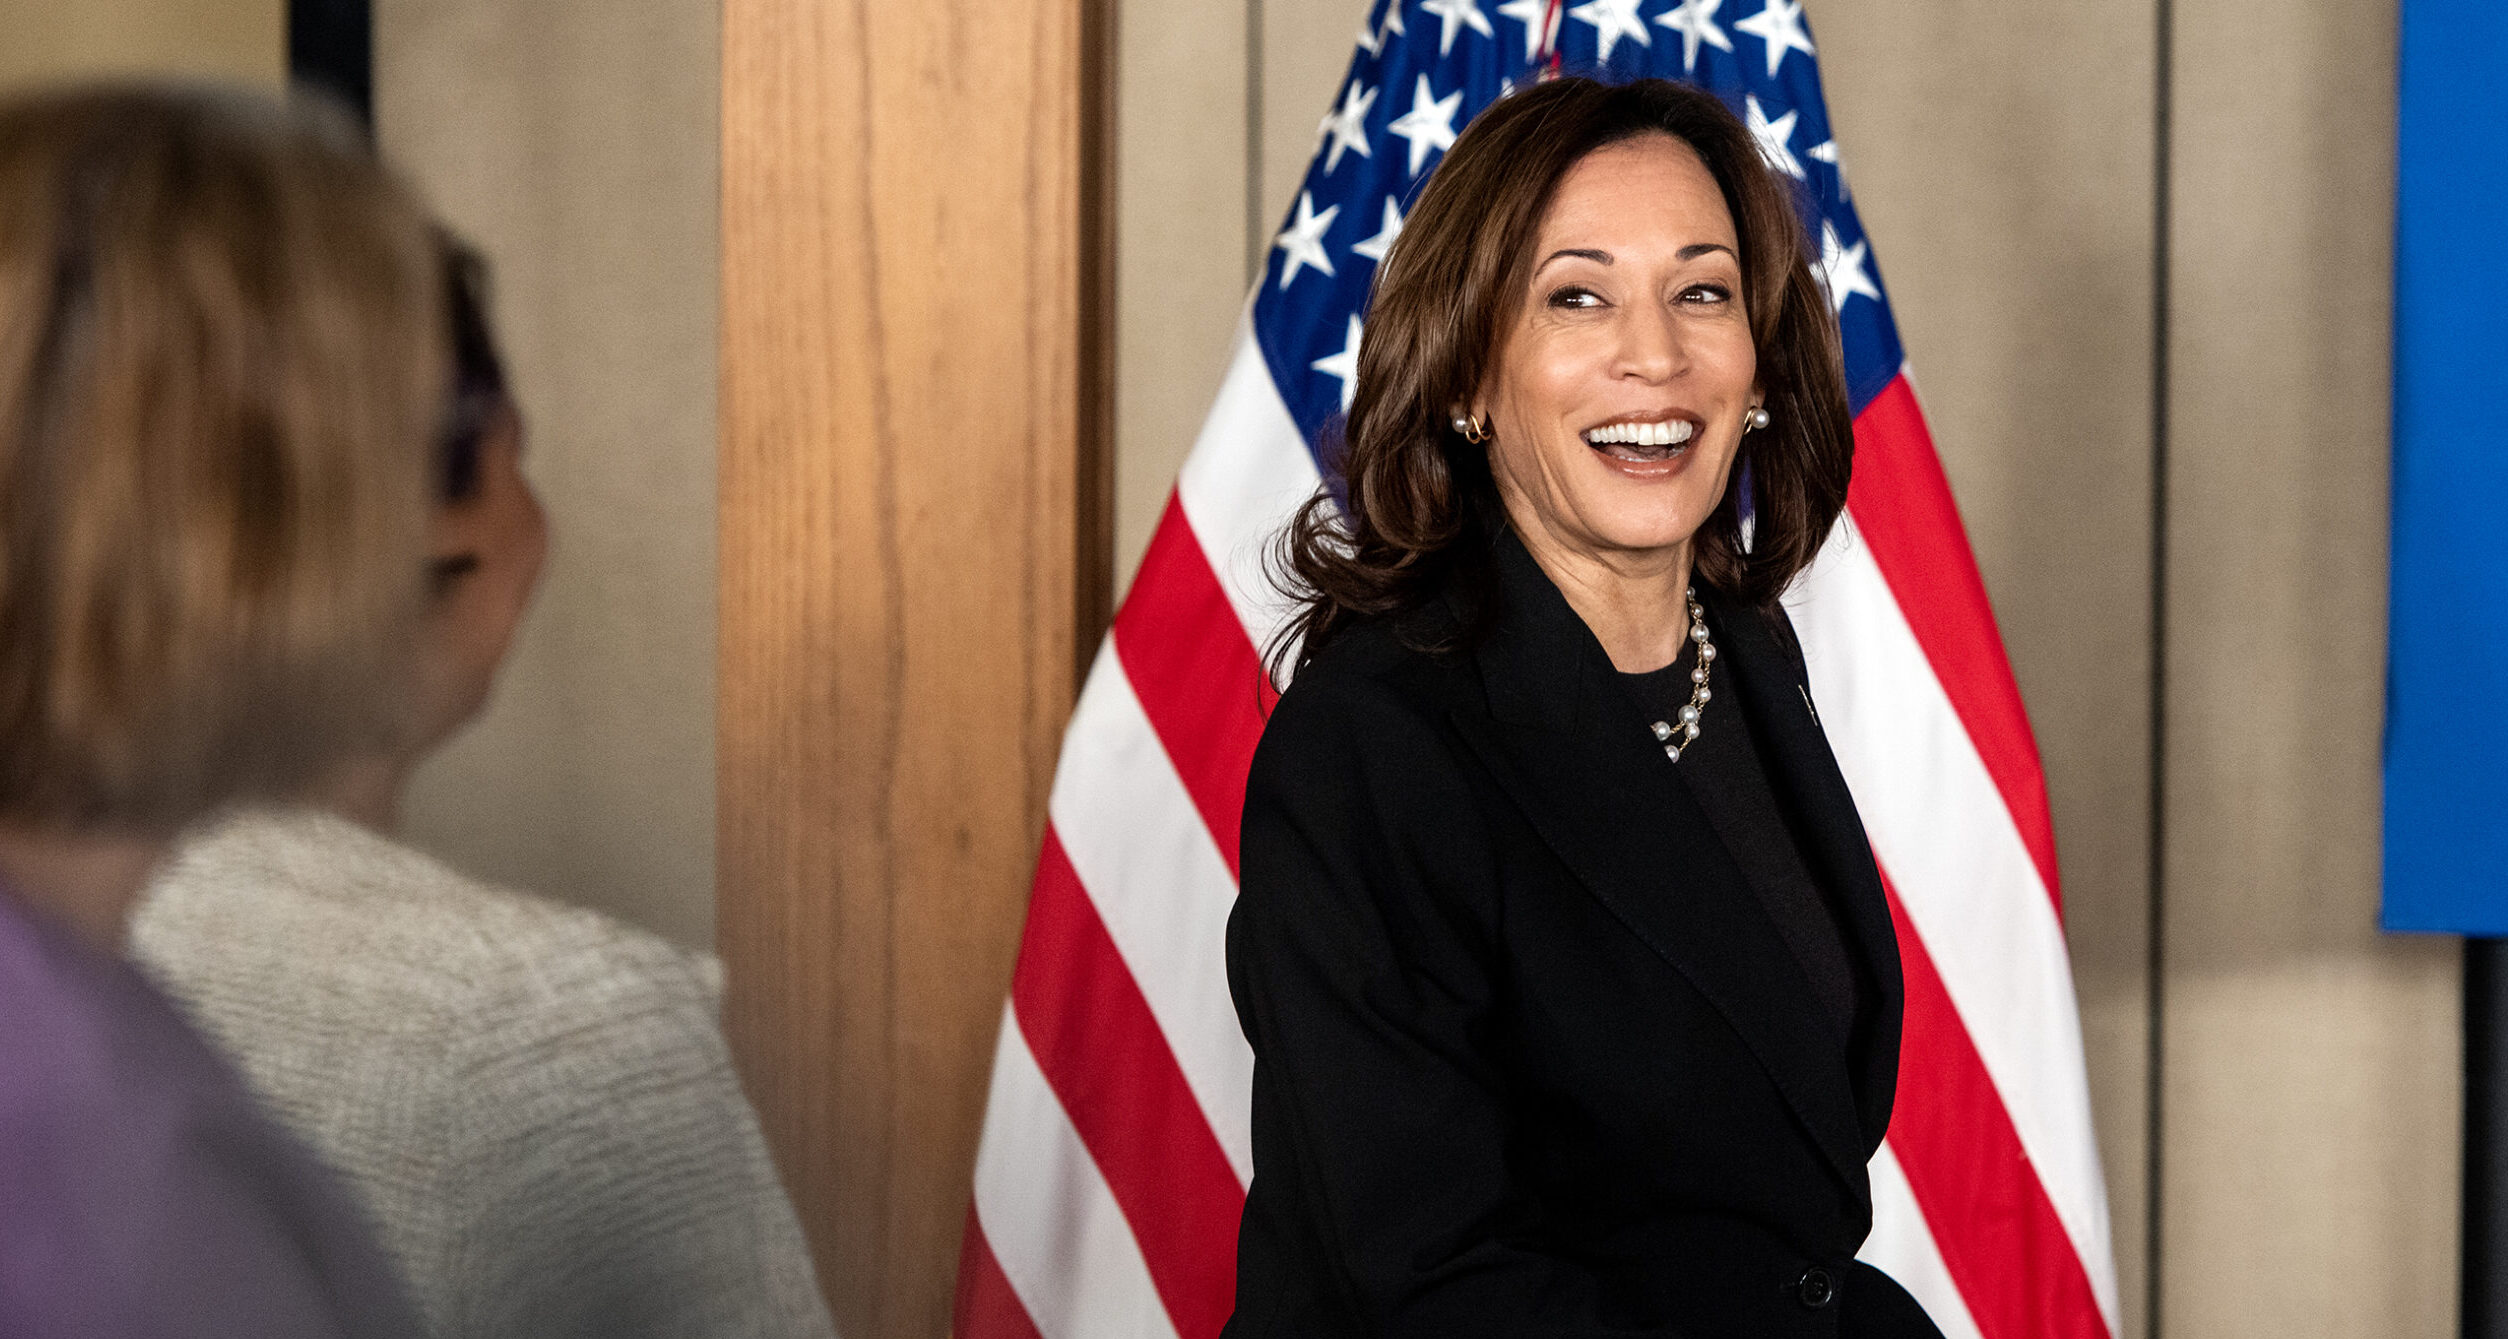 Harris making fifth visit to Wisconsin this year — her first as presumptive presidential nominee